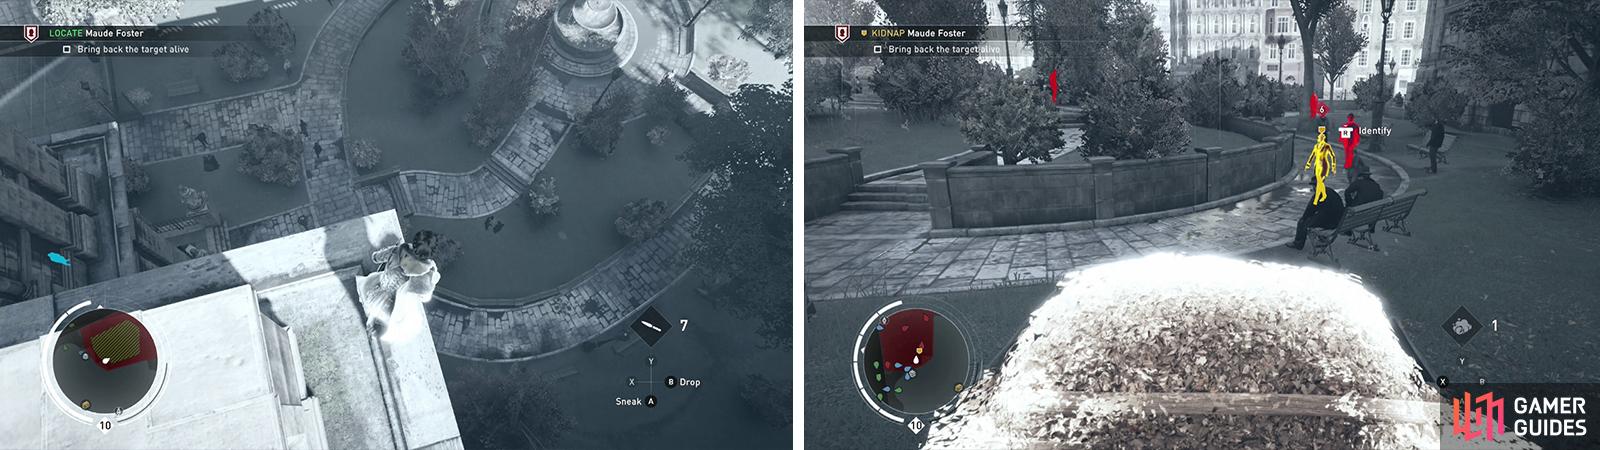 Dive into the haystack from the rooftop (left). Hop out when the target passes by to grab her quietly (right).